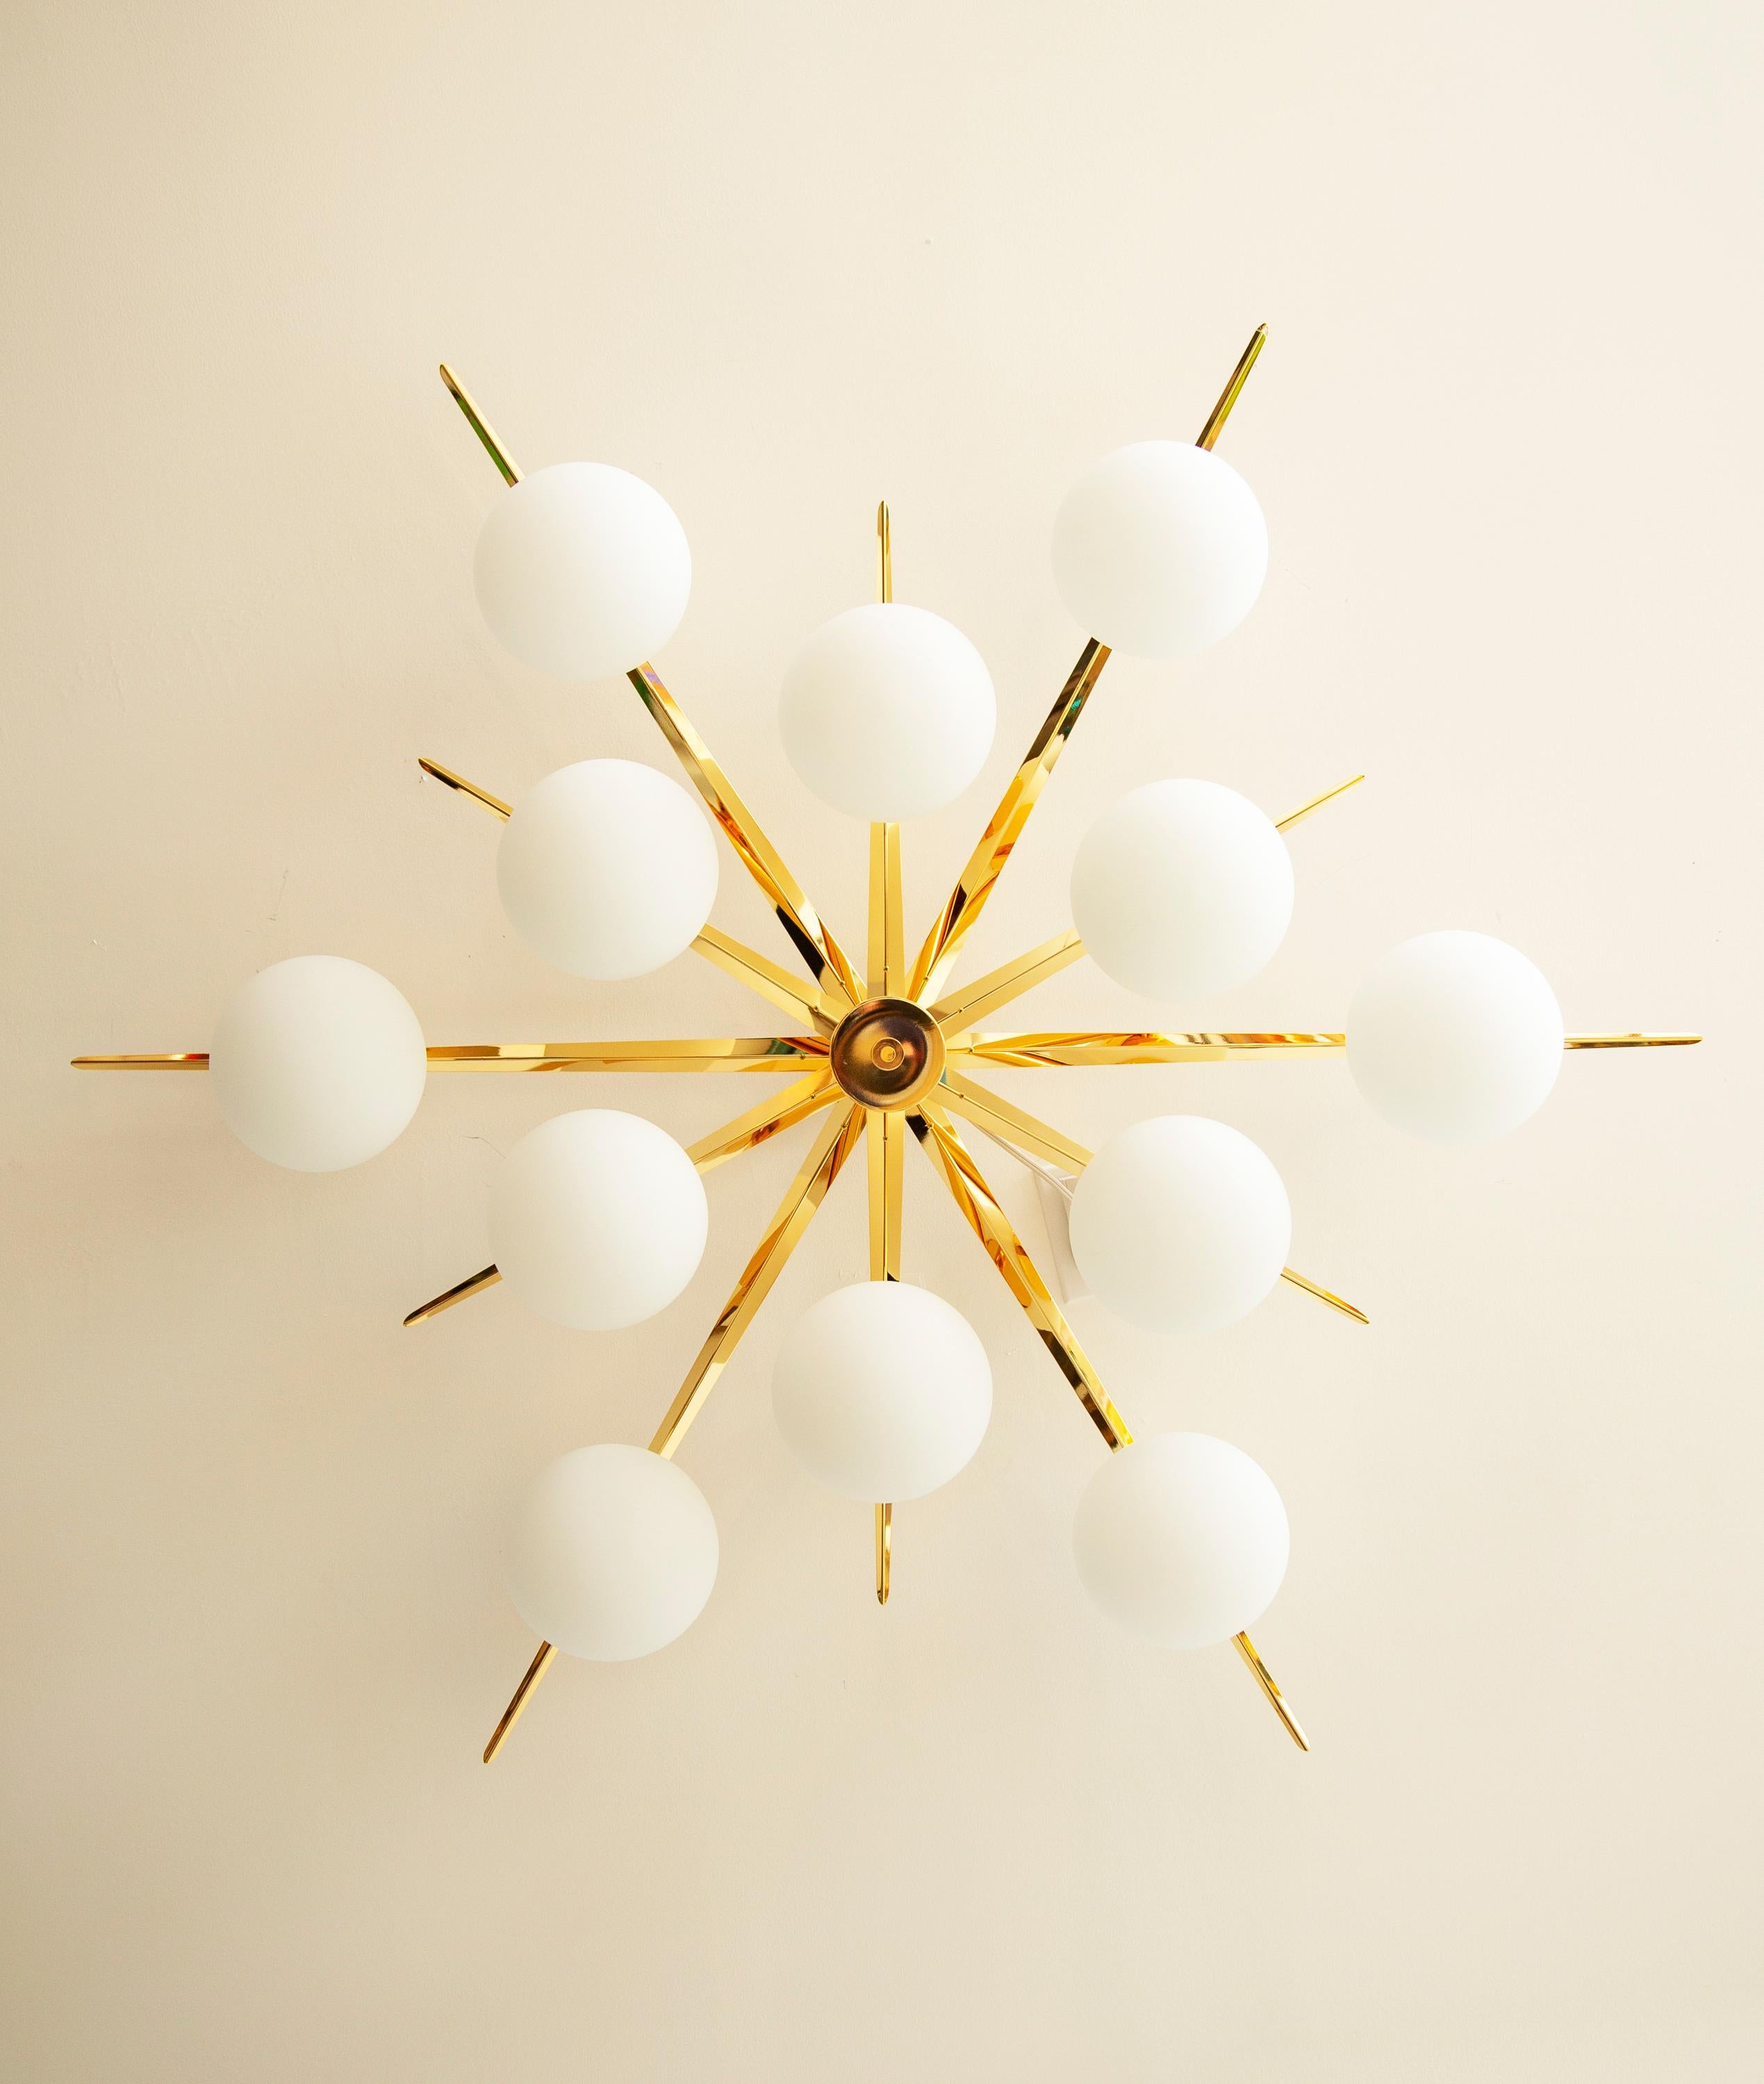 Contemporary flush mount starburst ceiling light in polished brass and matte glass
Features 12 oblong shape matte globes
Stunning design from all angles
Available to view in situ at our showroom in Miami.
Fixture should be checked by a specialist